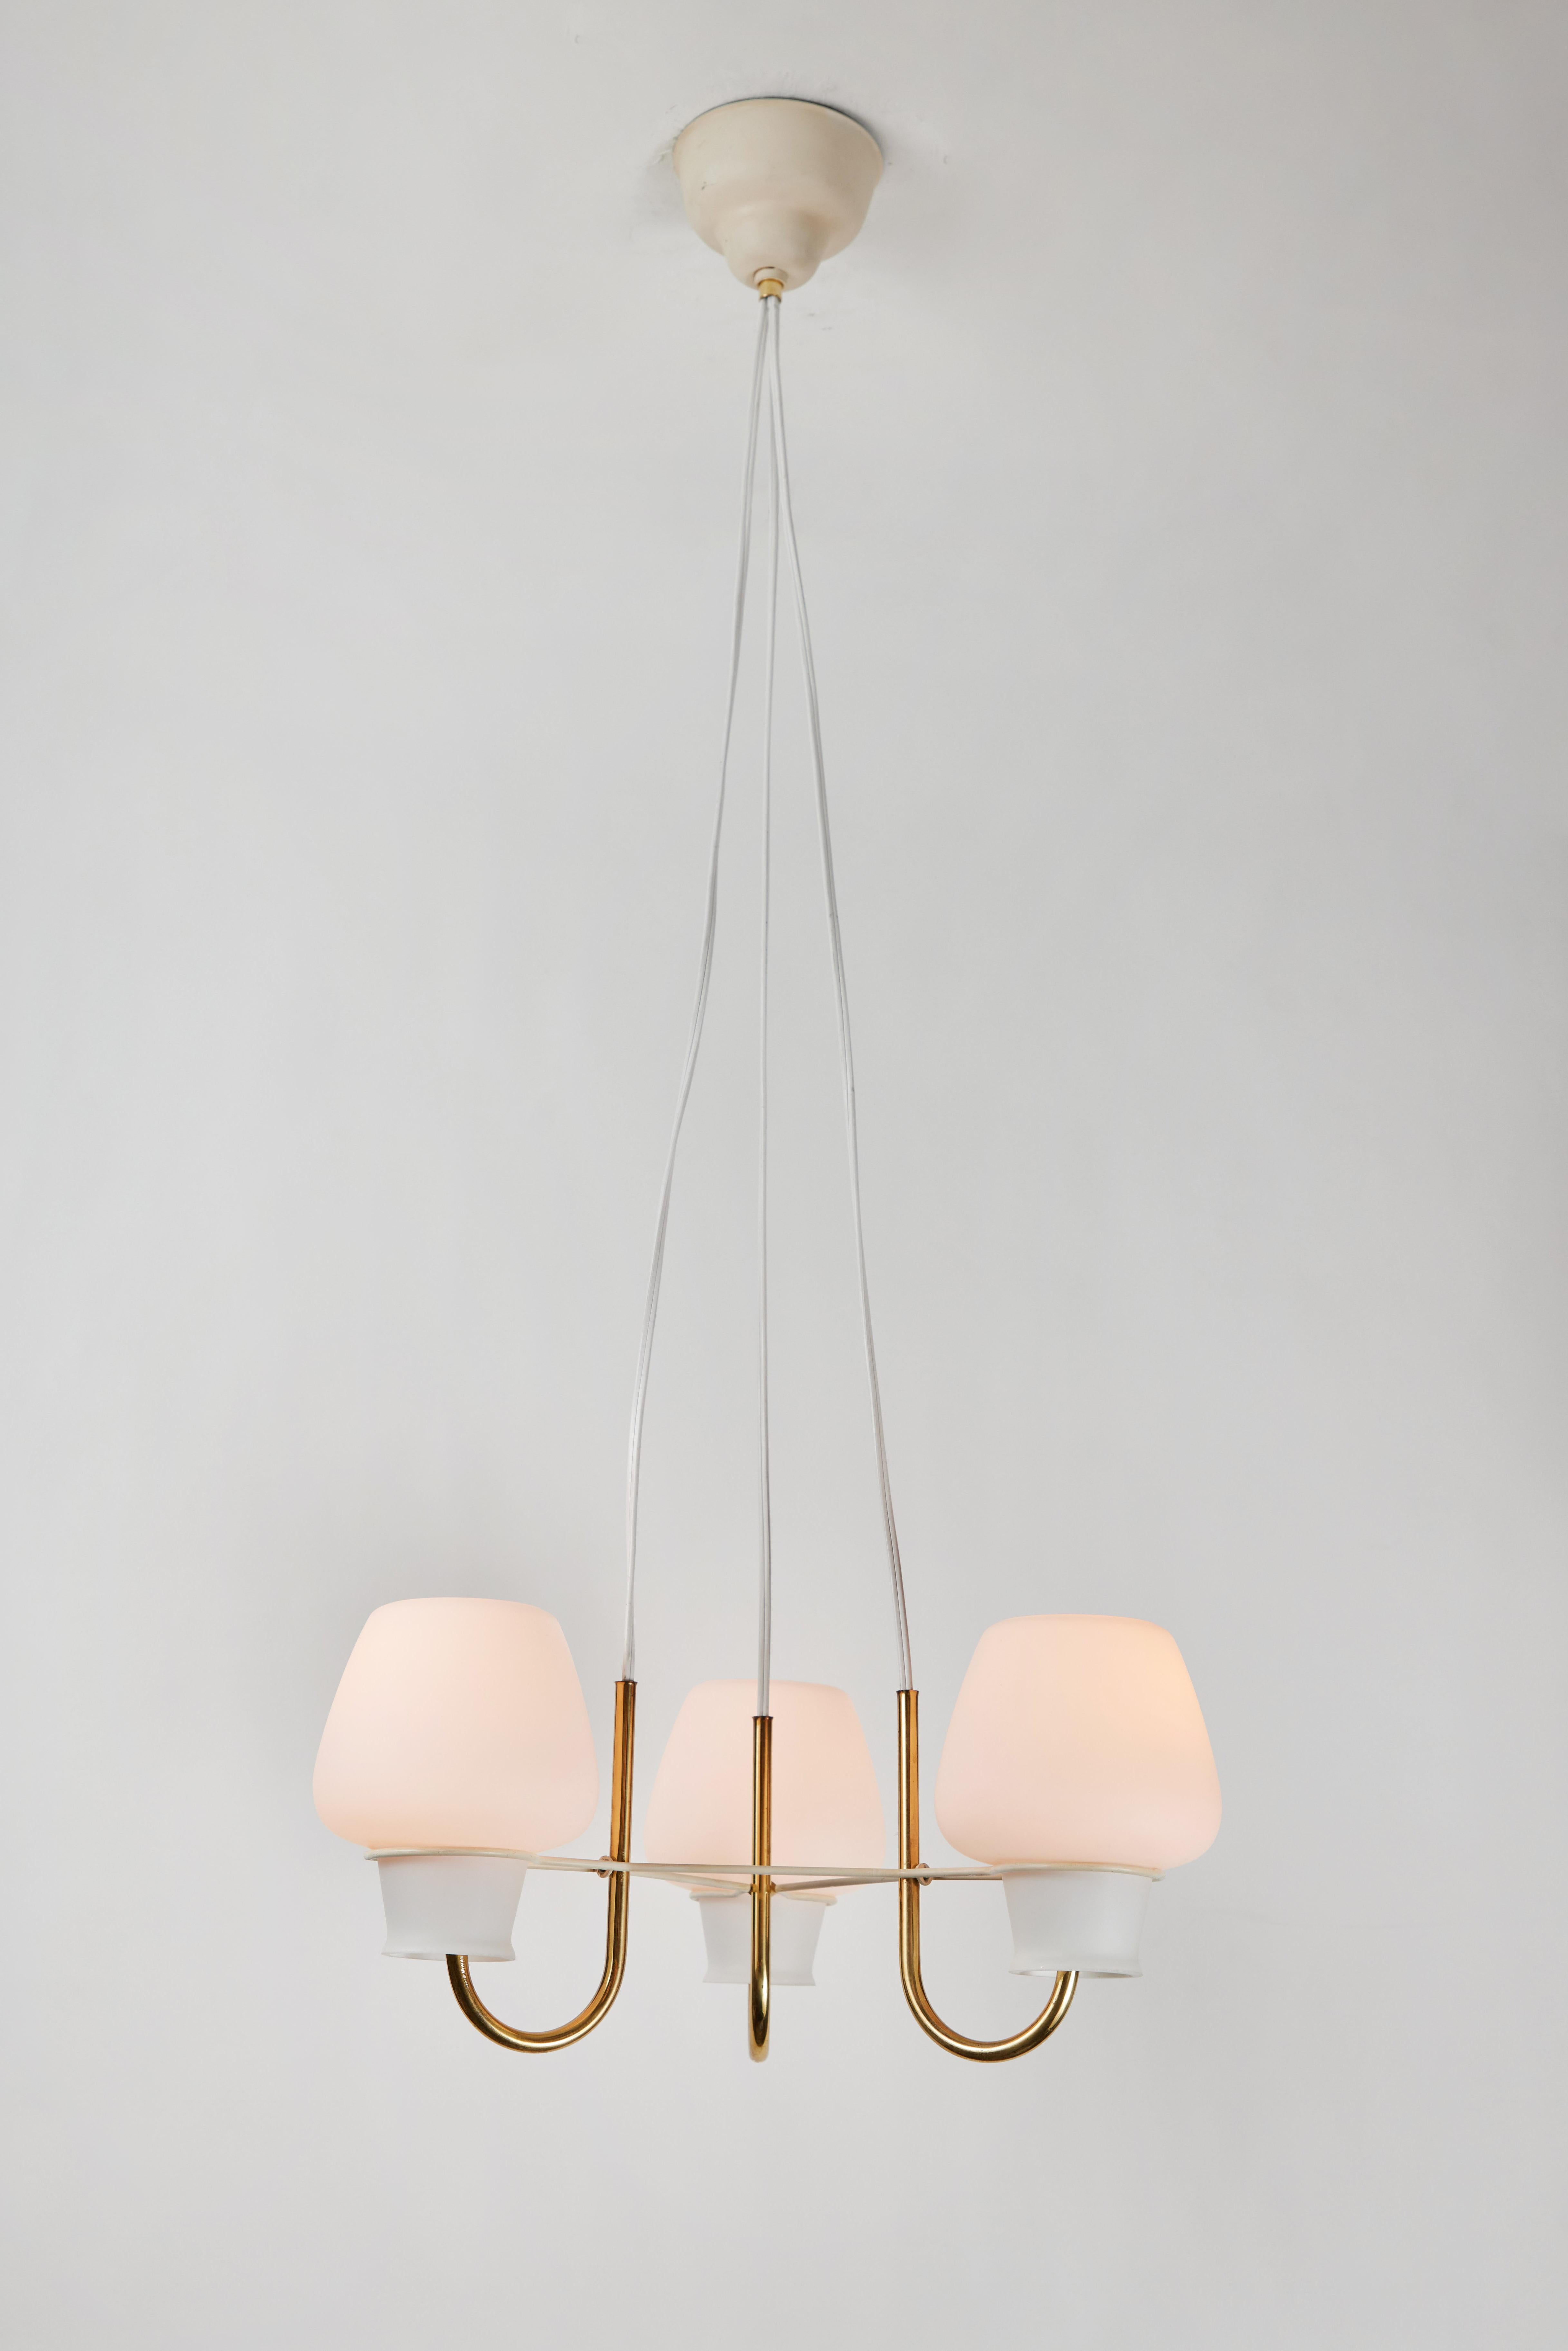 1950s Gunnar Asplund brass & glass suspension lamp by for ASEA. Executed in brass and white lacquered metal with 3 opaline glass elements in the style of Vilhelm Lauritzen. A lyrical and elegant Scandinavian modern design with a sculptural form and